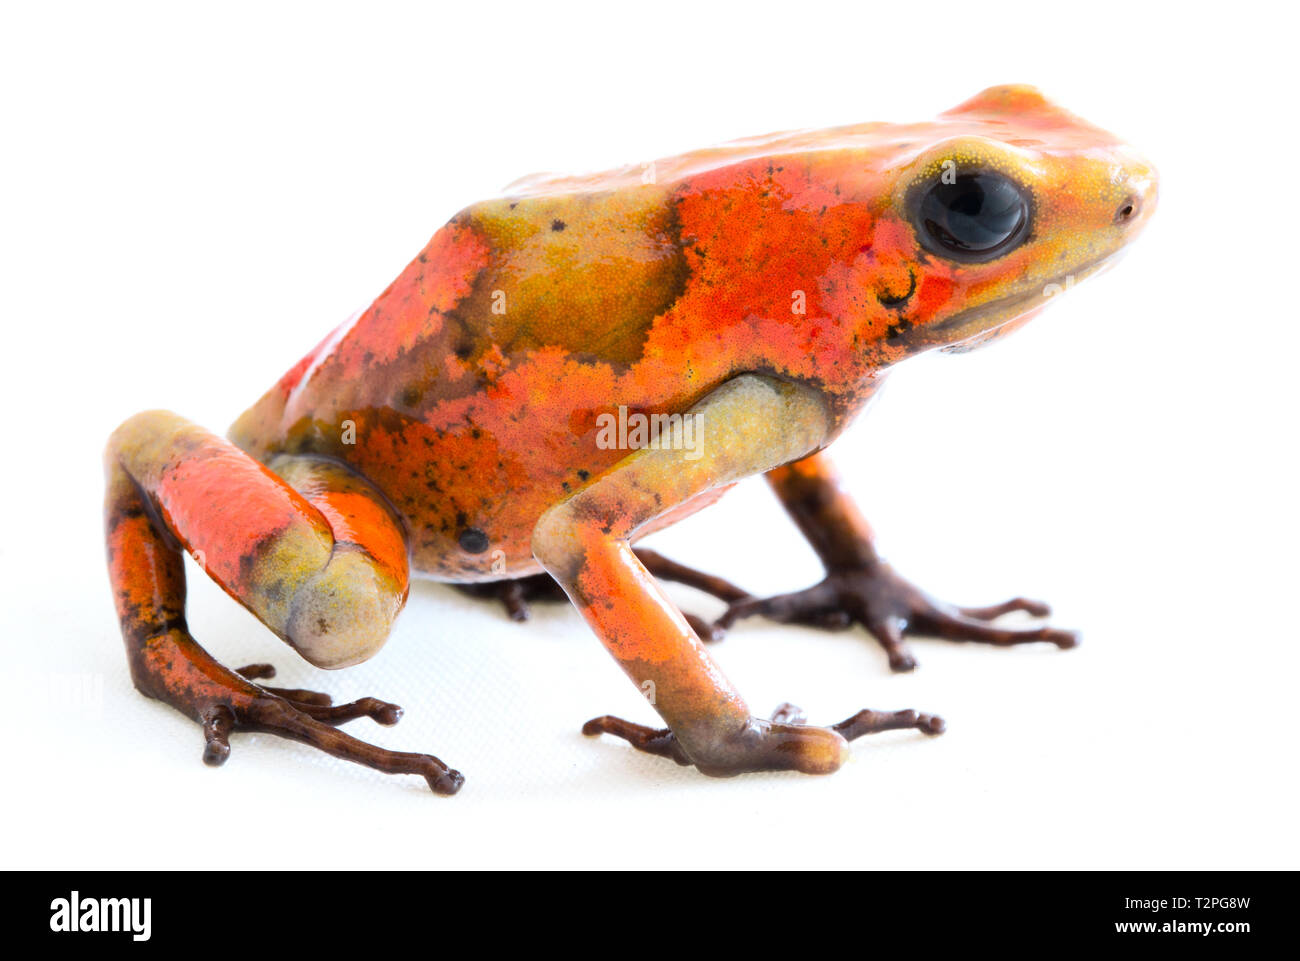 Poison dart frog, Oophaga histrionica. A small poisonous animal from the rain forest of Colombia. Stock Photo